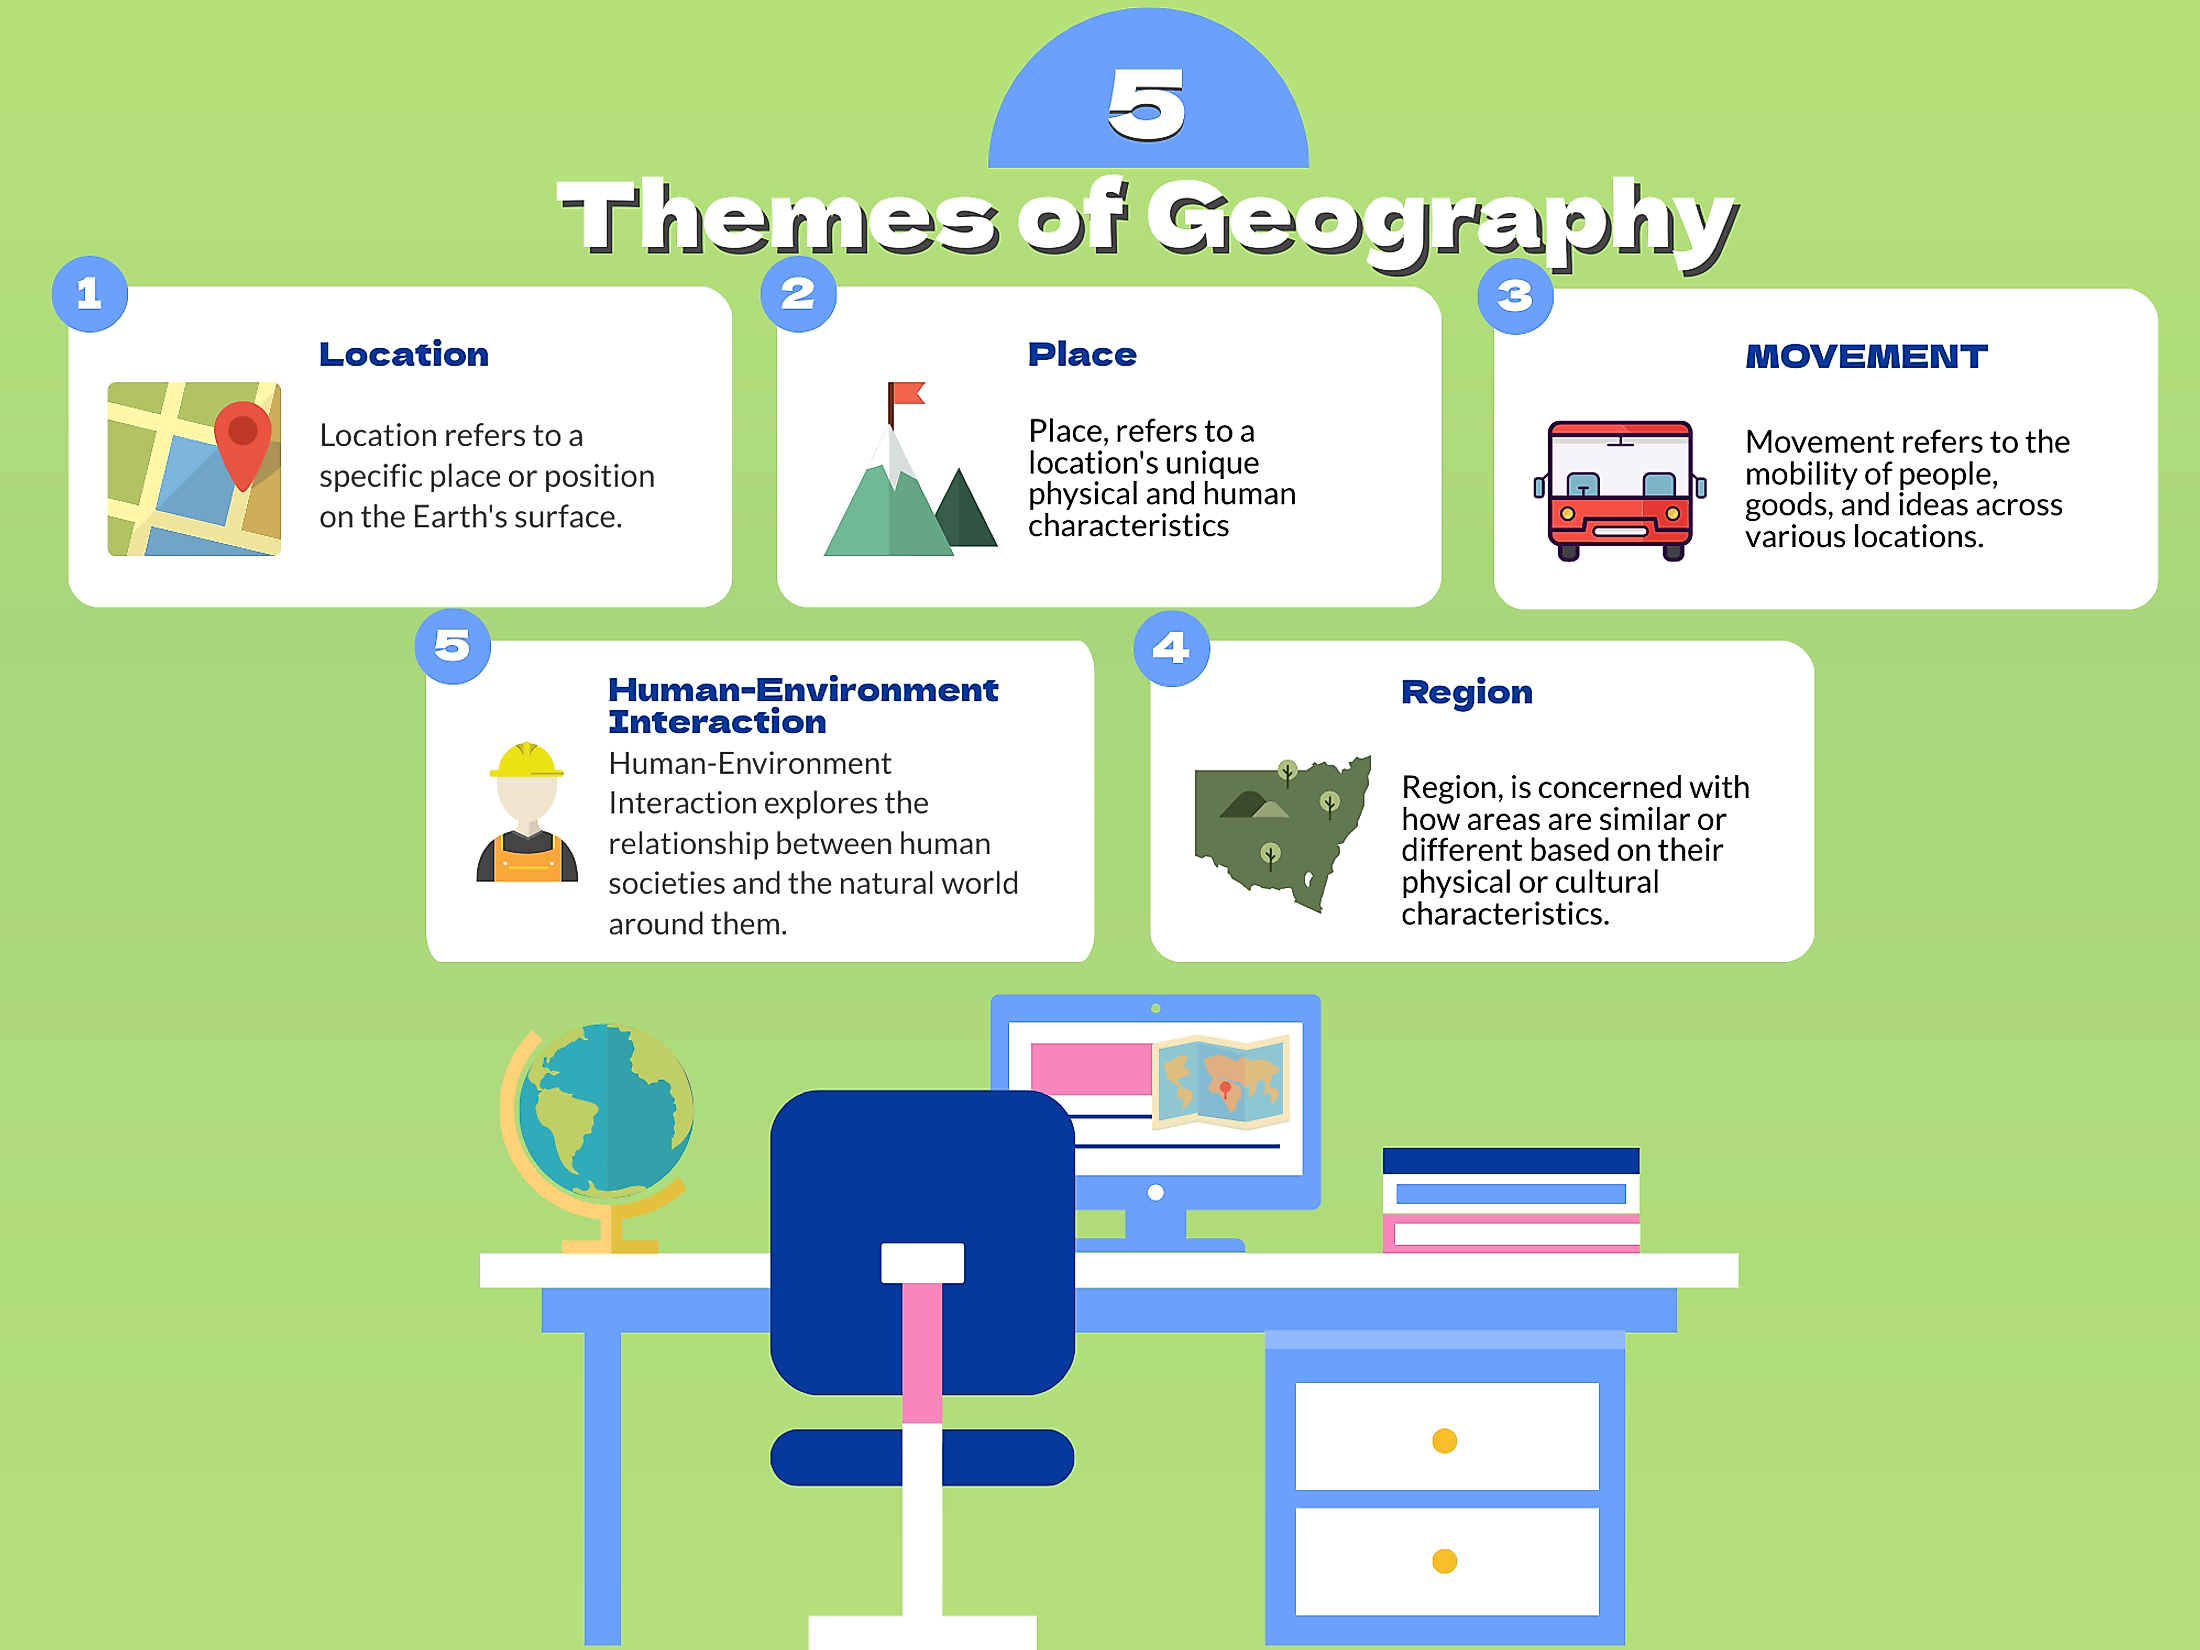 What are the 5 themes of geography and explain them?